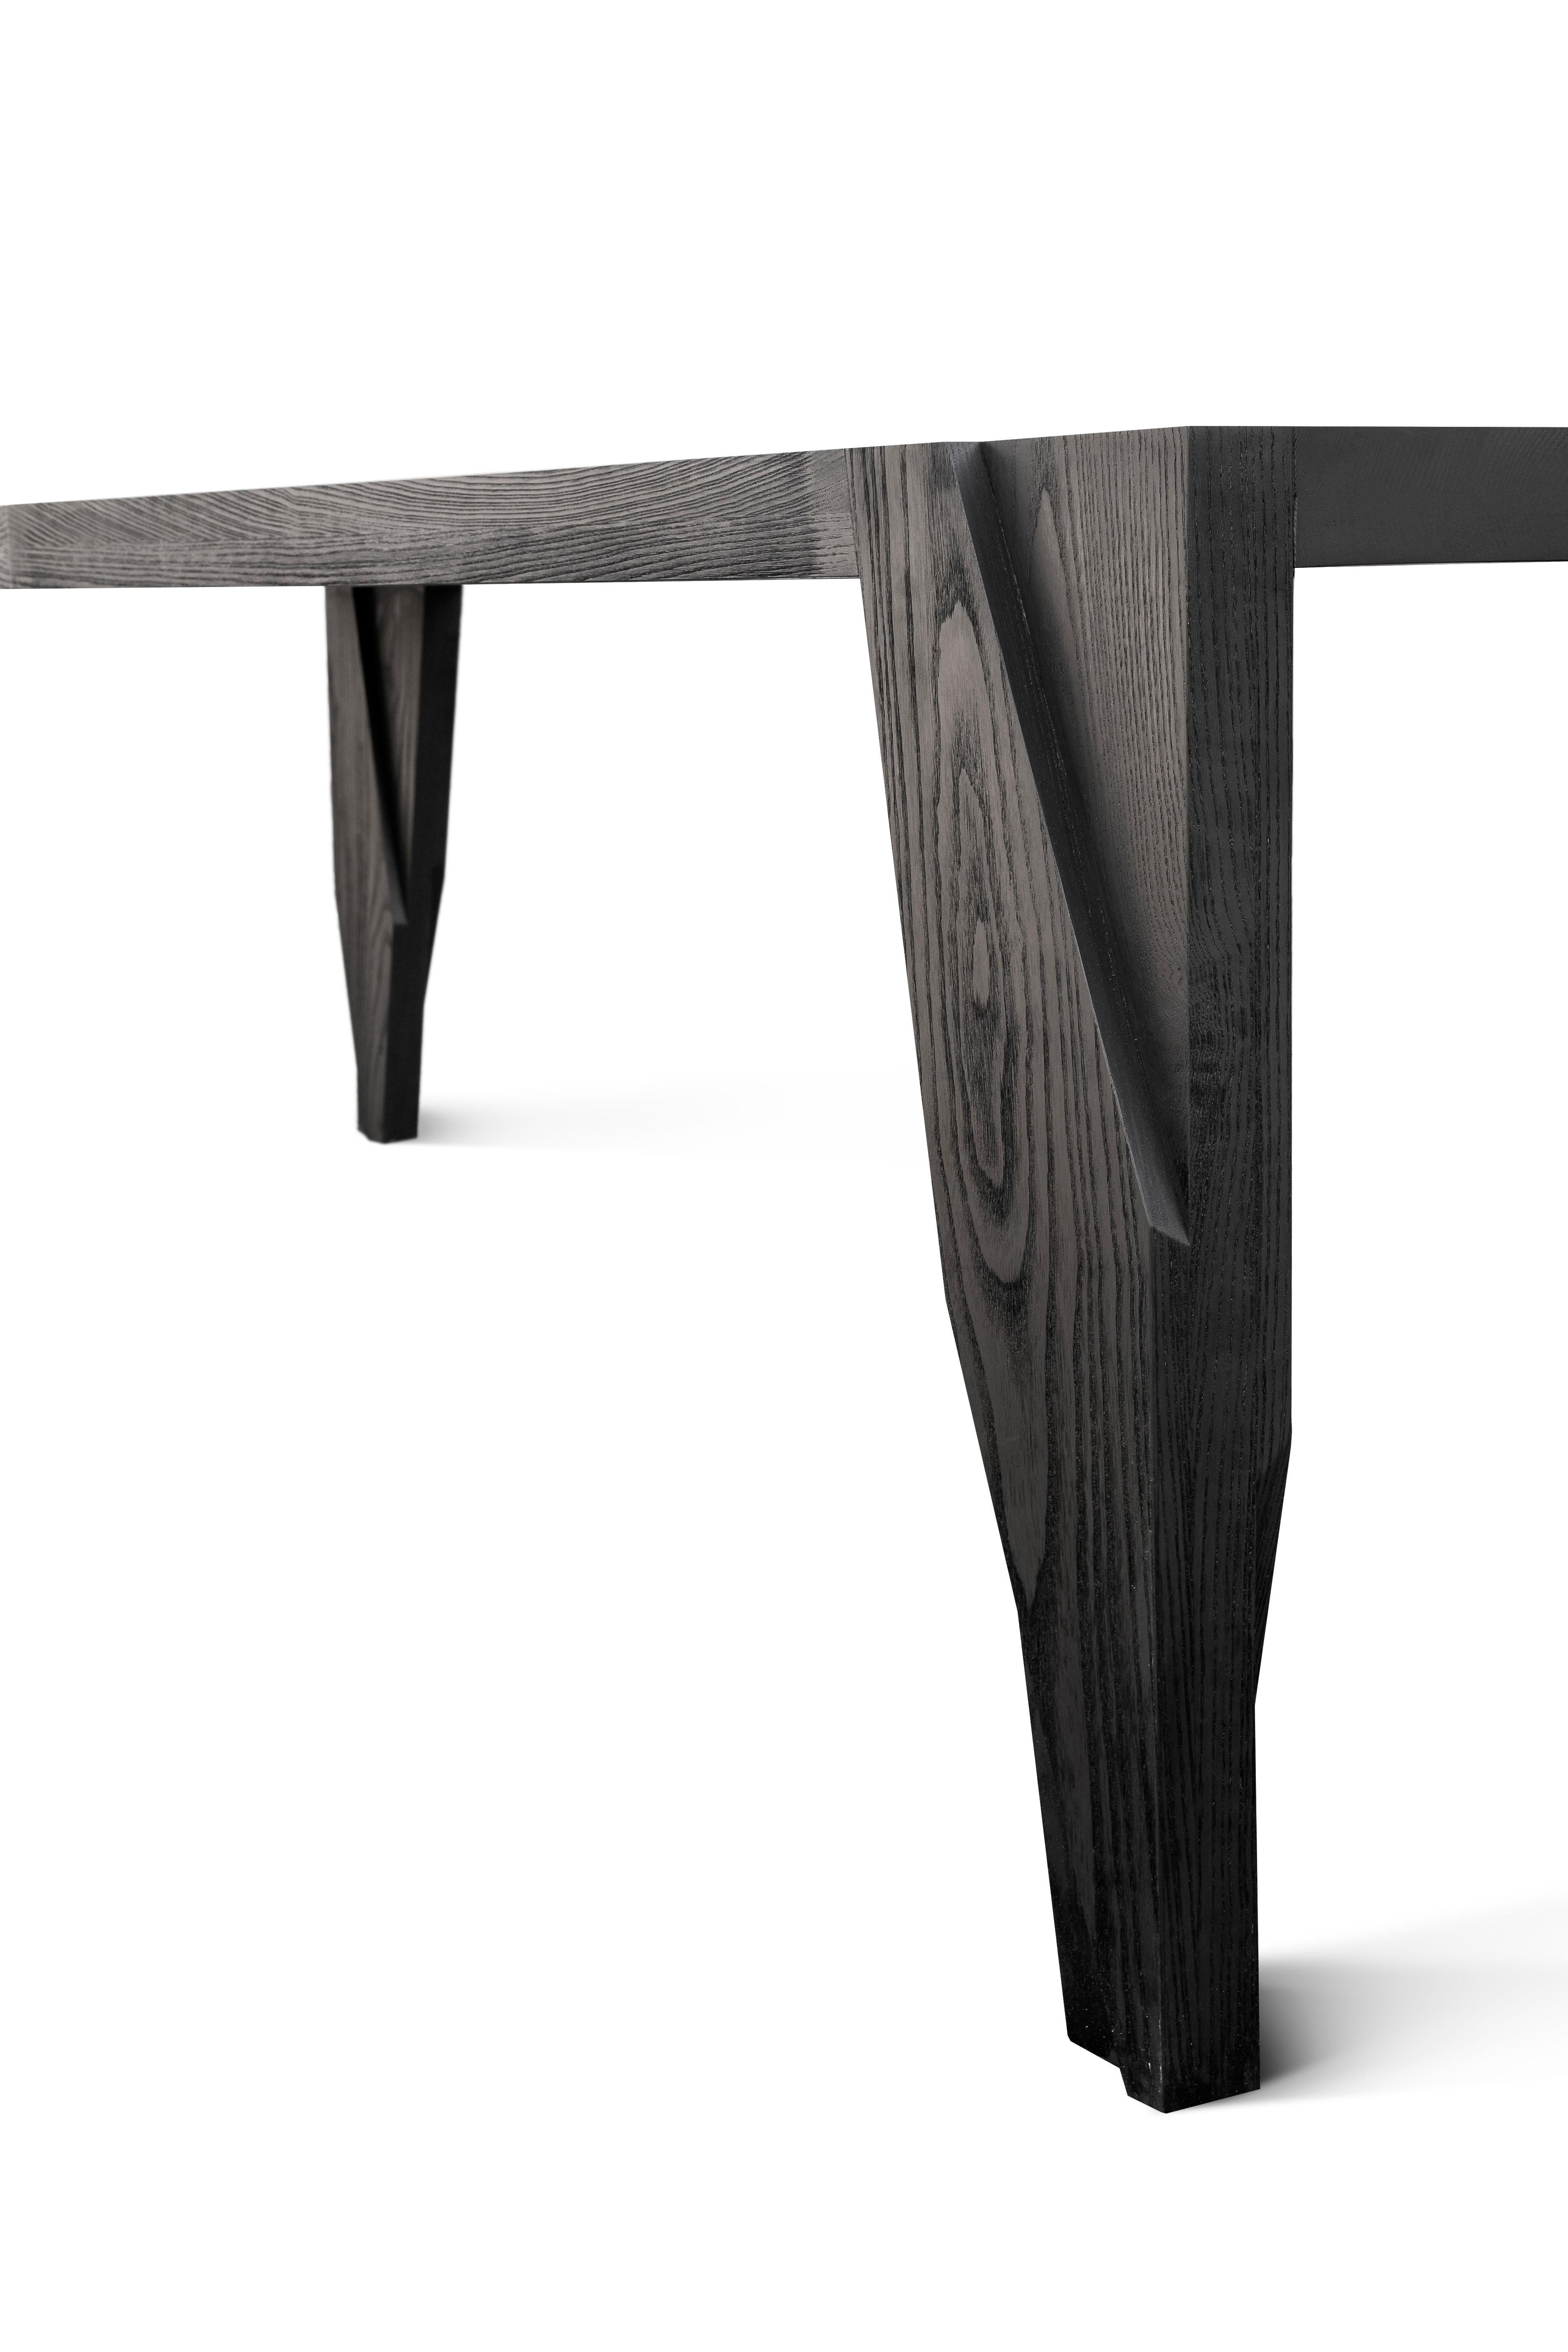 Contemporary Black Wooden 6 Seater Dining Table, Moramour by Adam Court for Okha For Sale 5